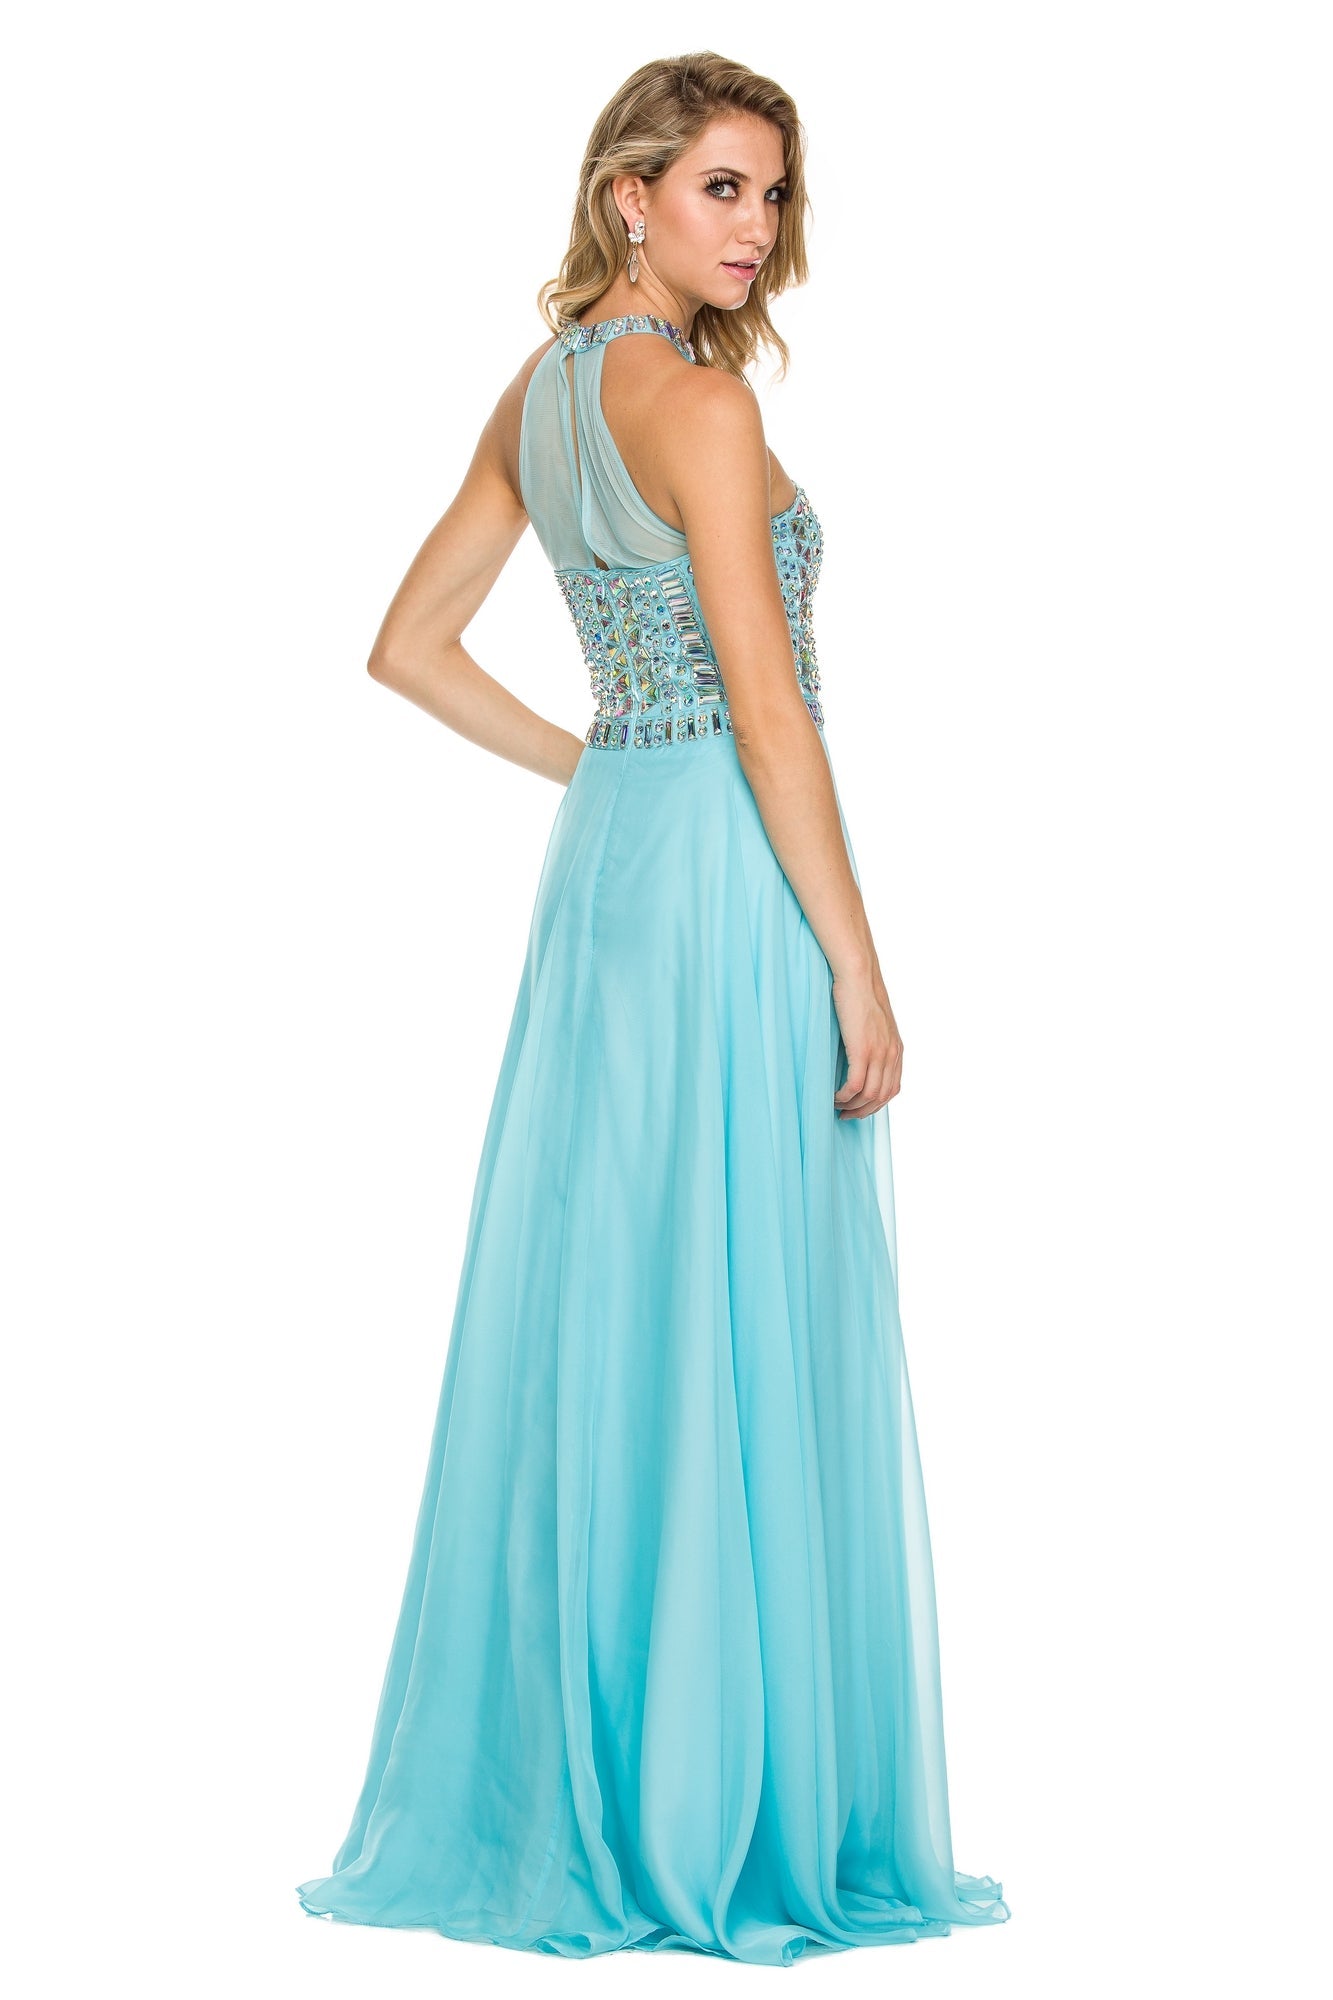  Beaded High-Neck Long A-Line Prom Dress